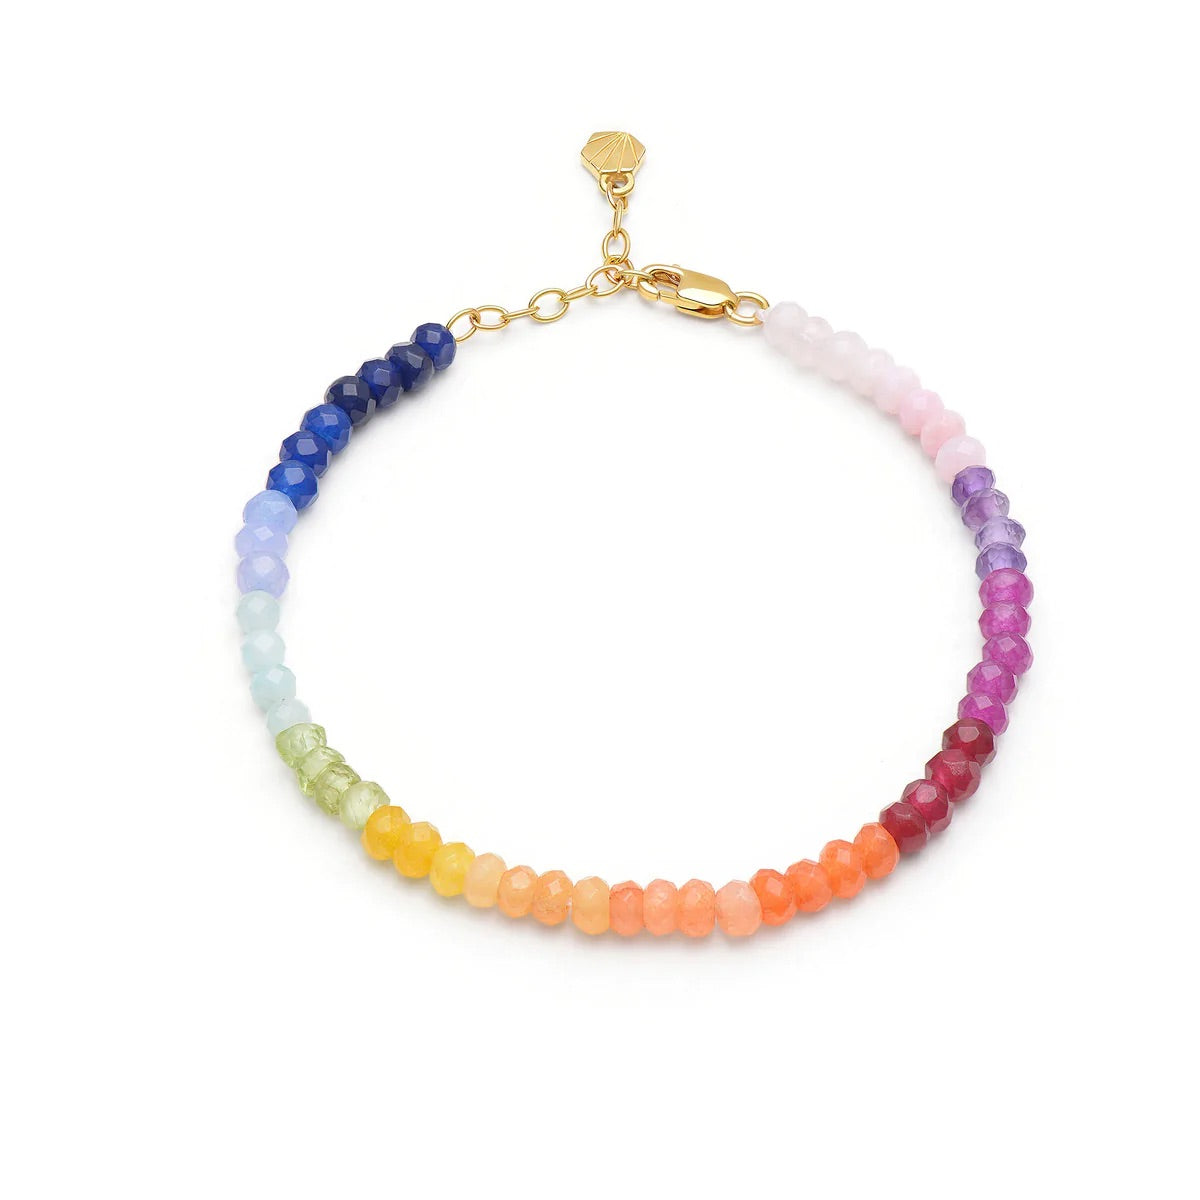 Rainbow Sunset Gemstone Anklet by Rachel Jackson on a white background, featuring adjustable-size.